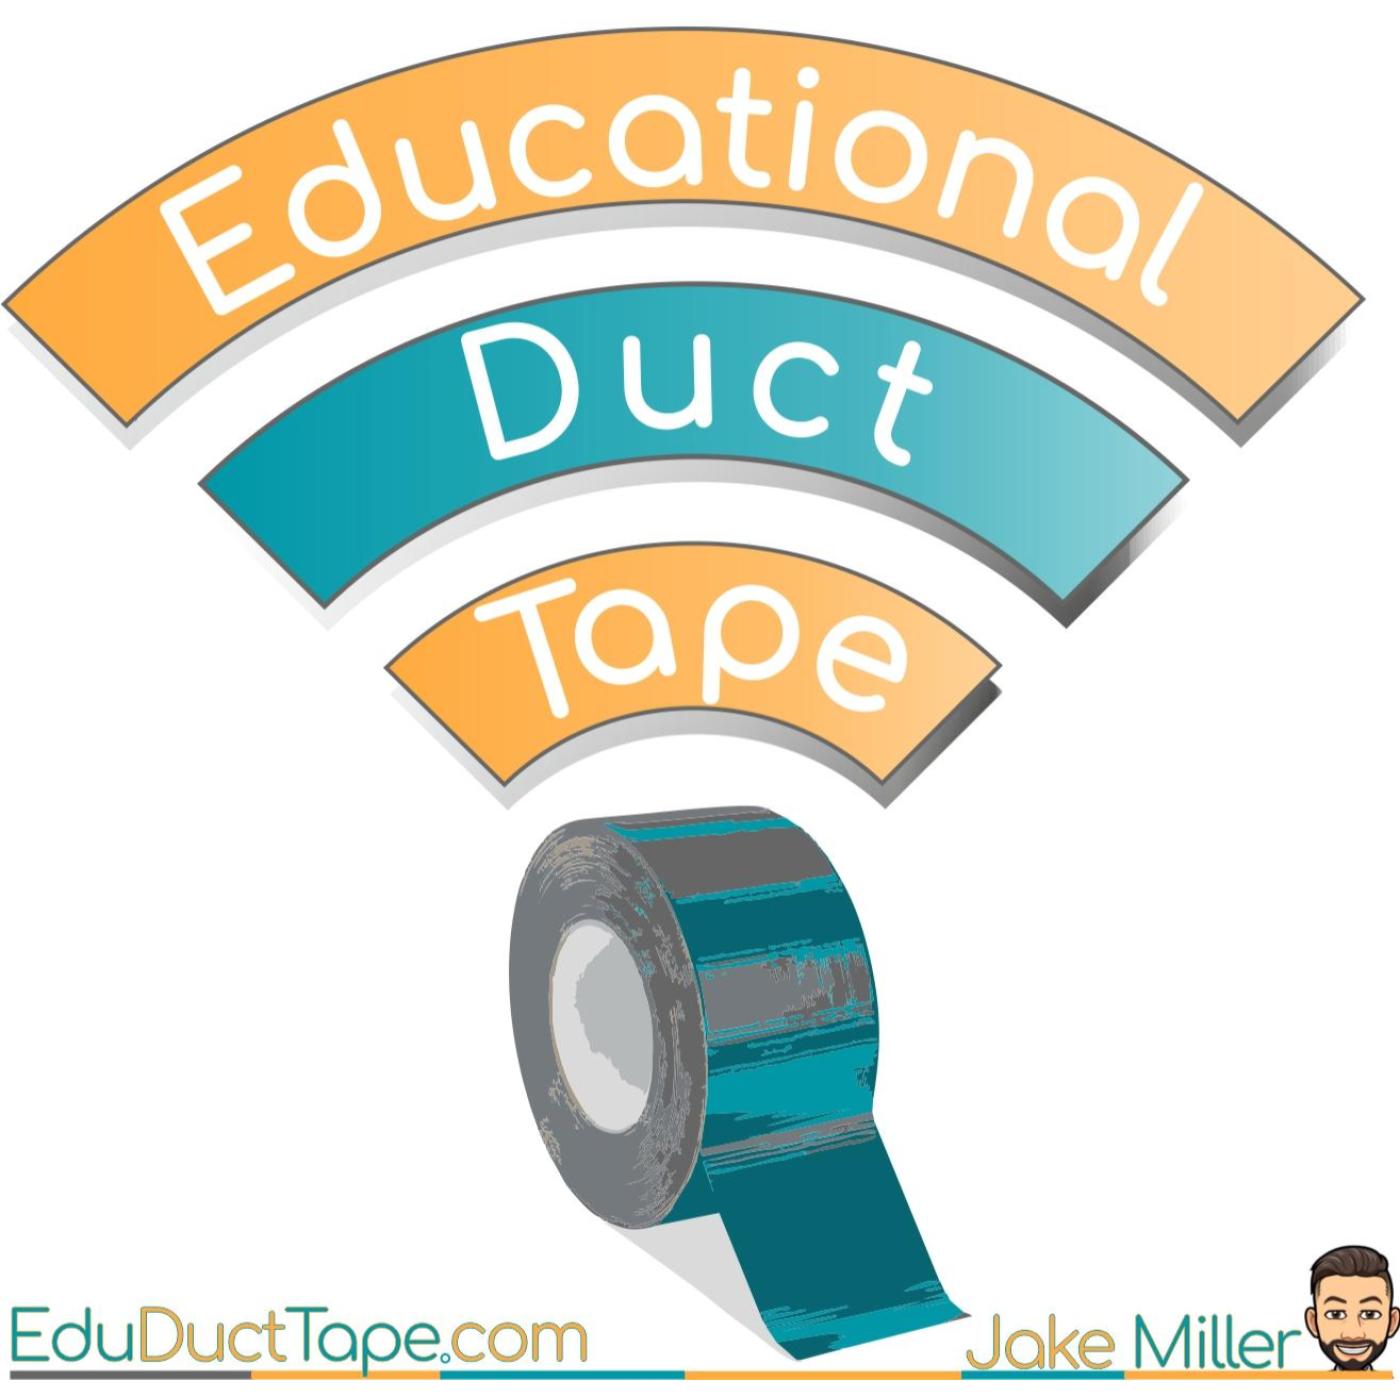 Educational duct tape, Joshua Stamper, aspire to lead